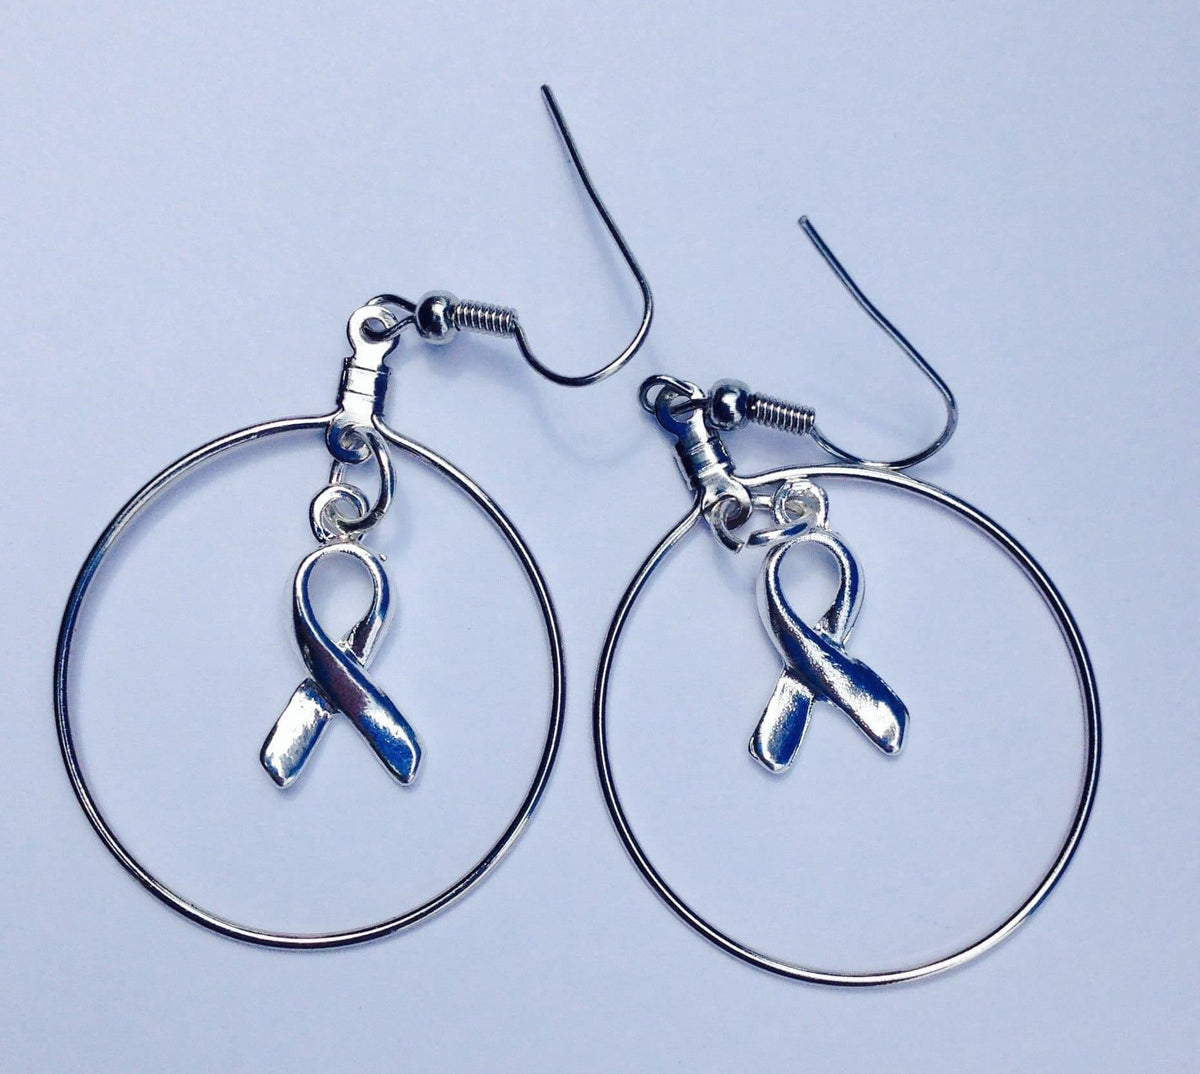 All Causes Ribbon Charm Medium Hooped Earrings - The House of Awareness